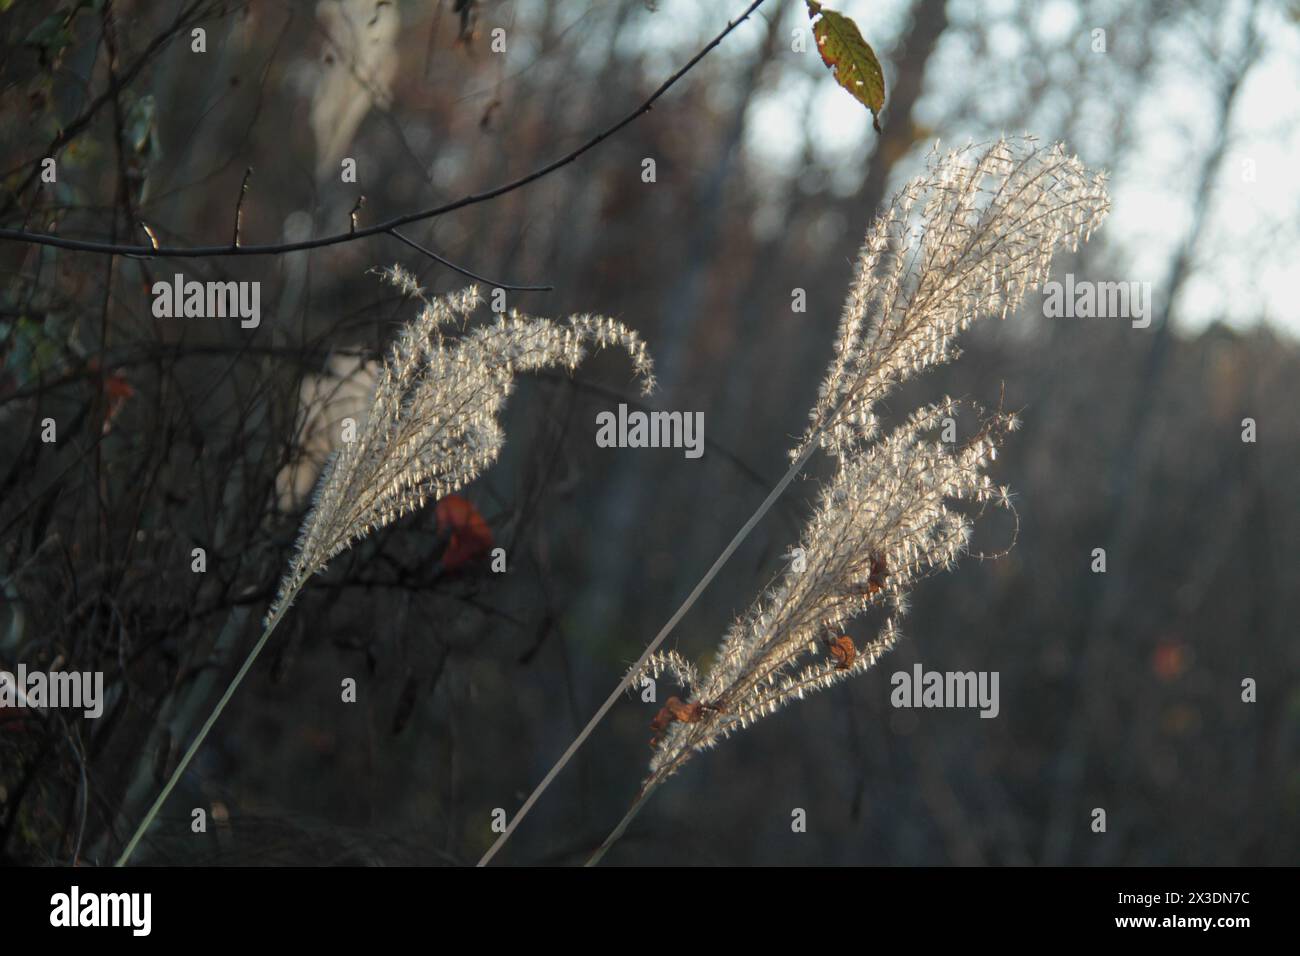 Virginia, U.S.A. Close-up of Chinese silver grass growing in the wild. Stock Photo